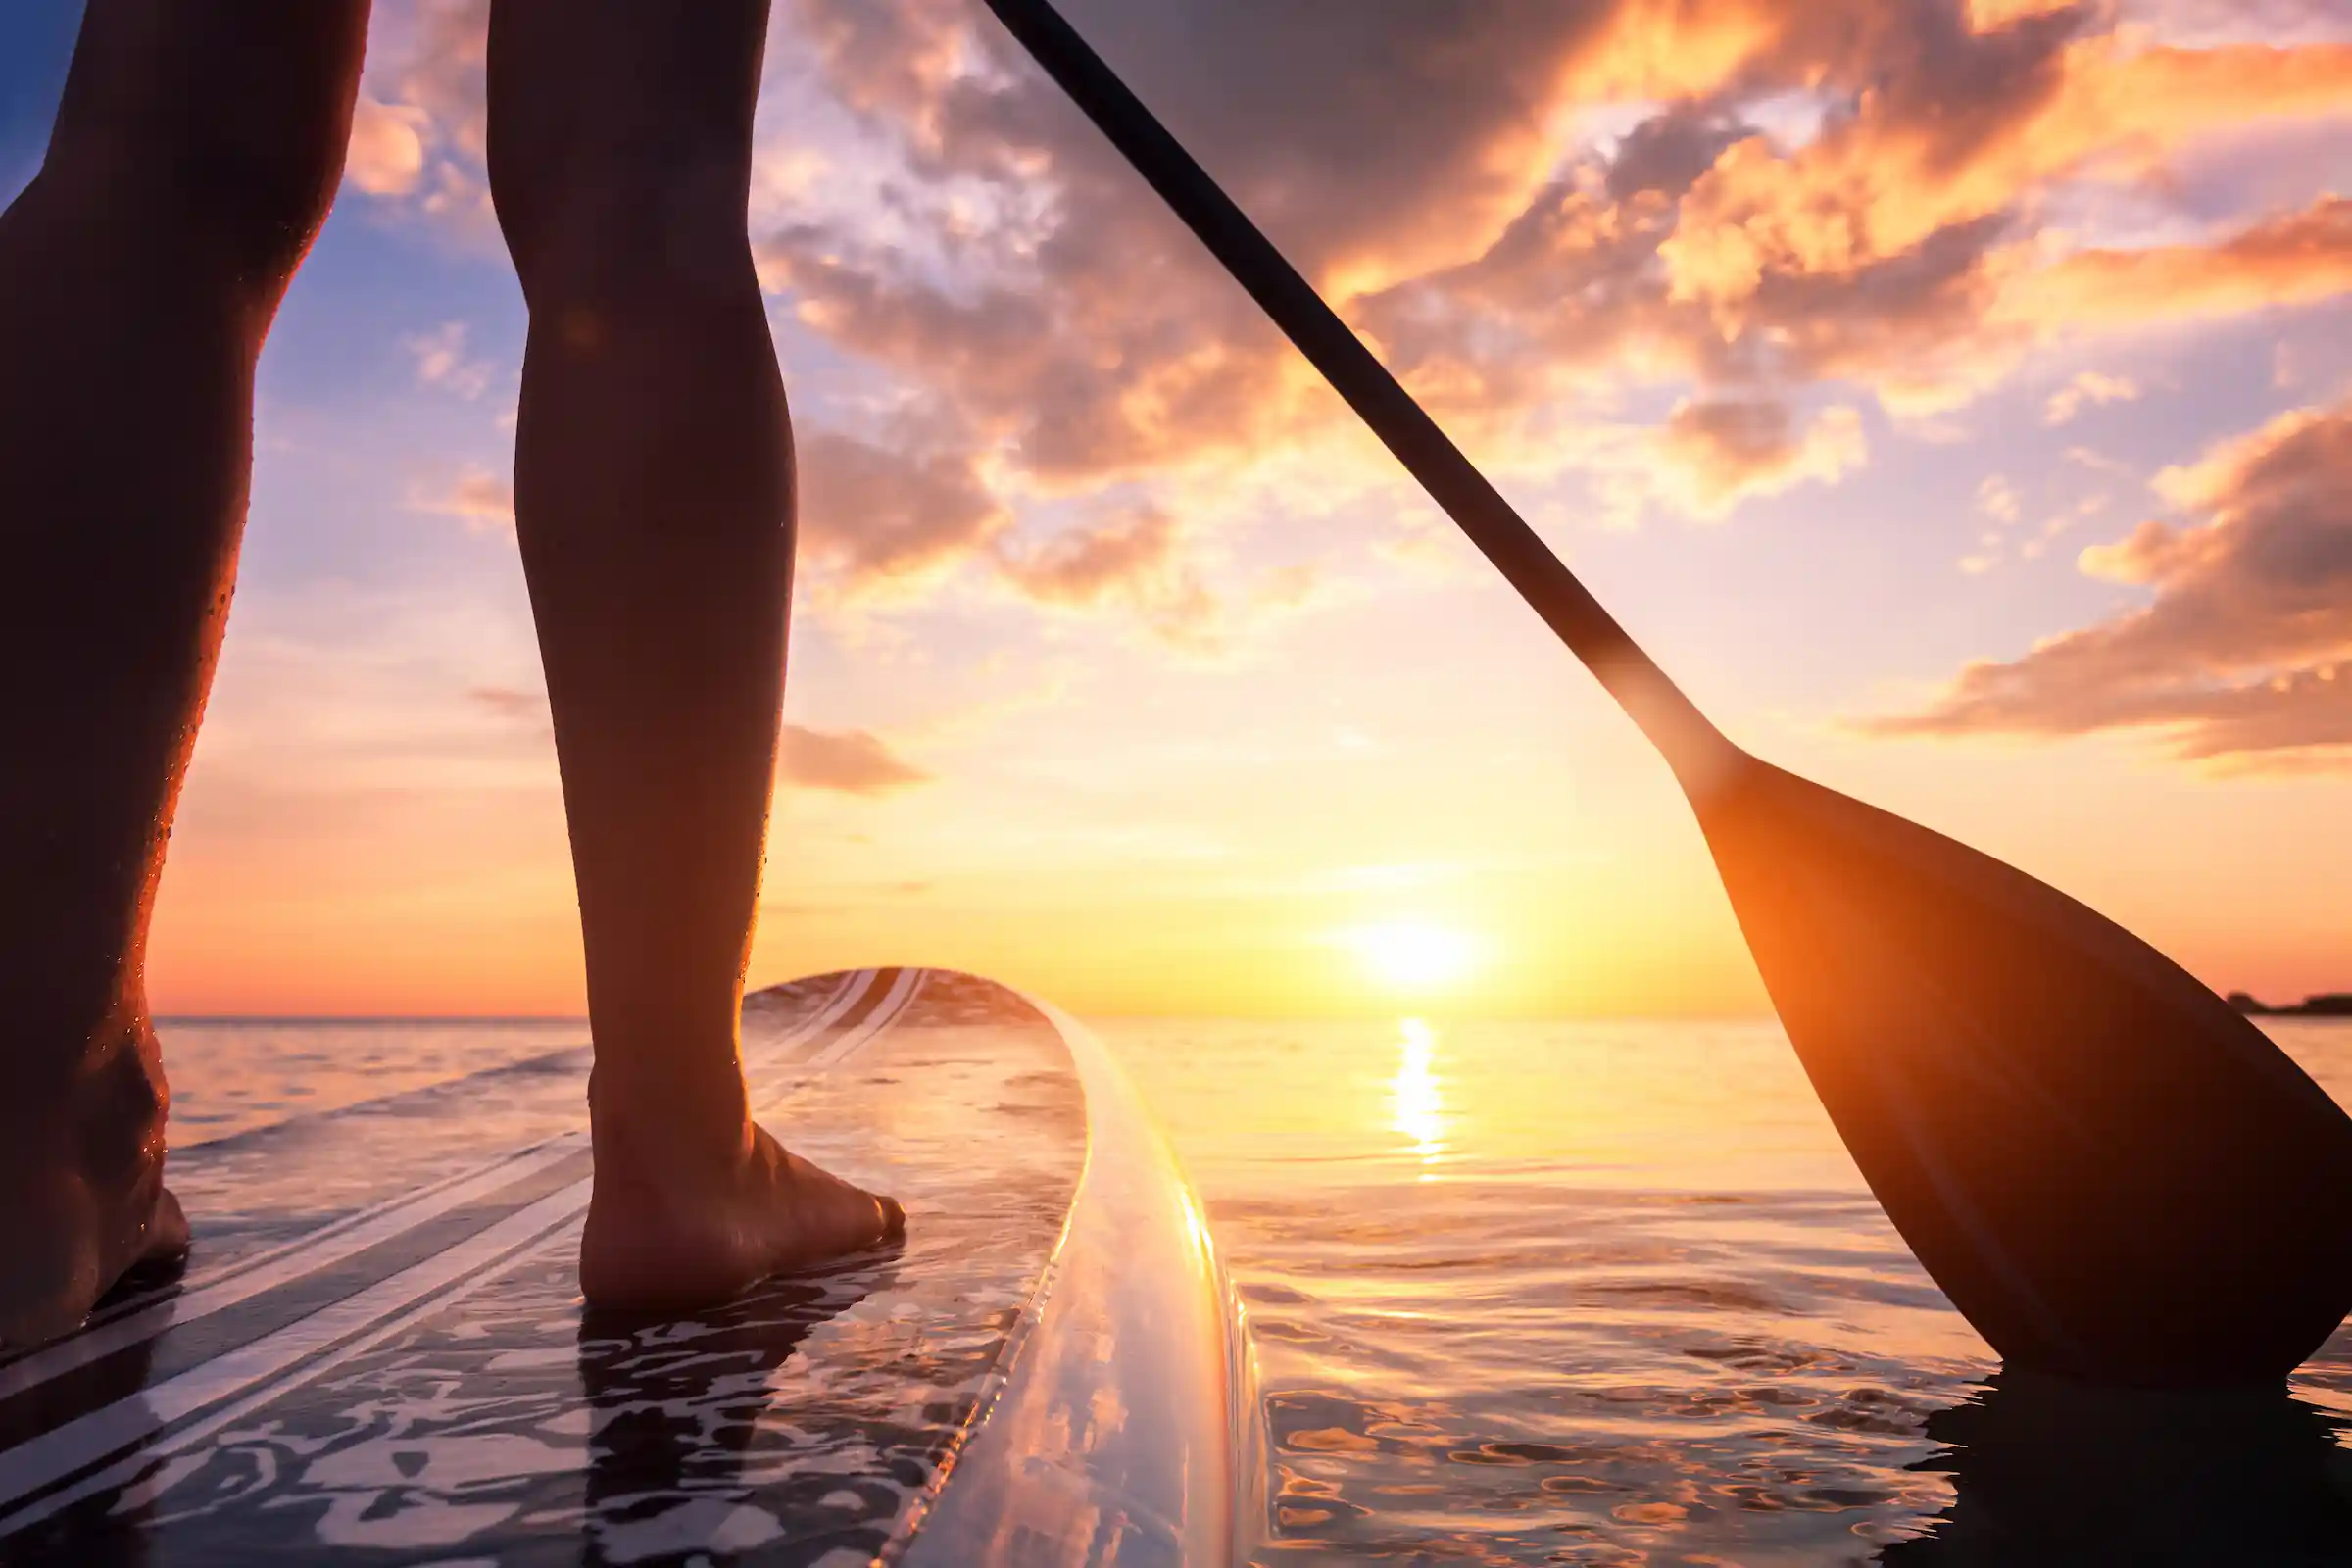 Stand up paddleboarding at sunset